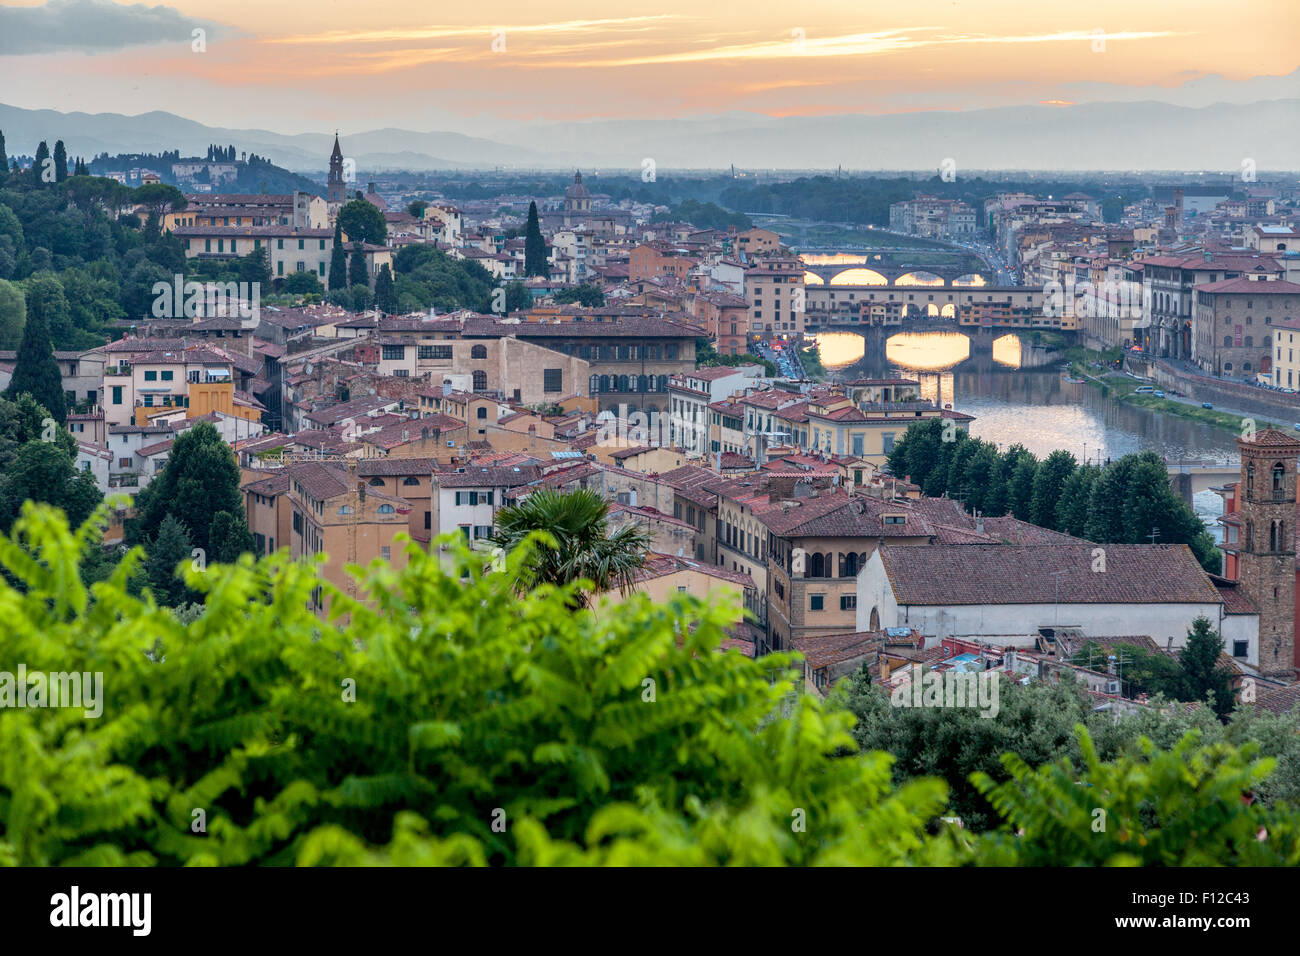 Evening view across Florence from Piazzale Michelangelo looking at Cattedrale di Santa Maria del Fiore Stock Photo